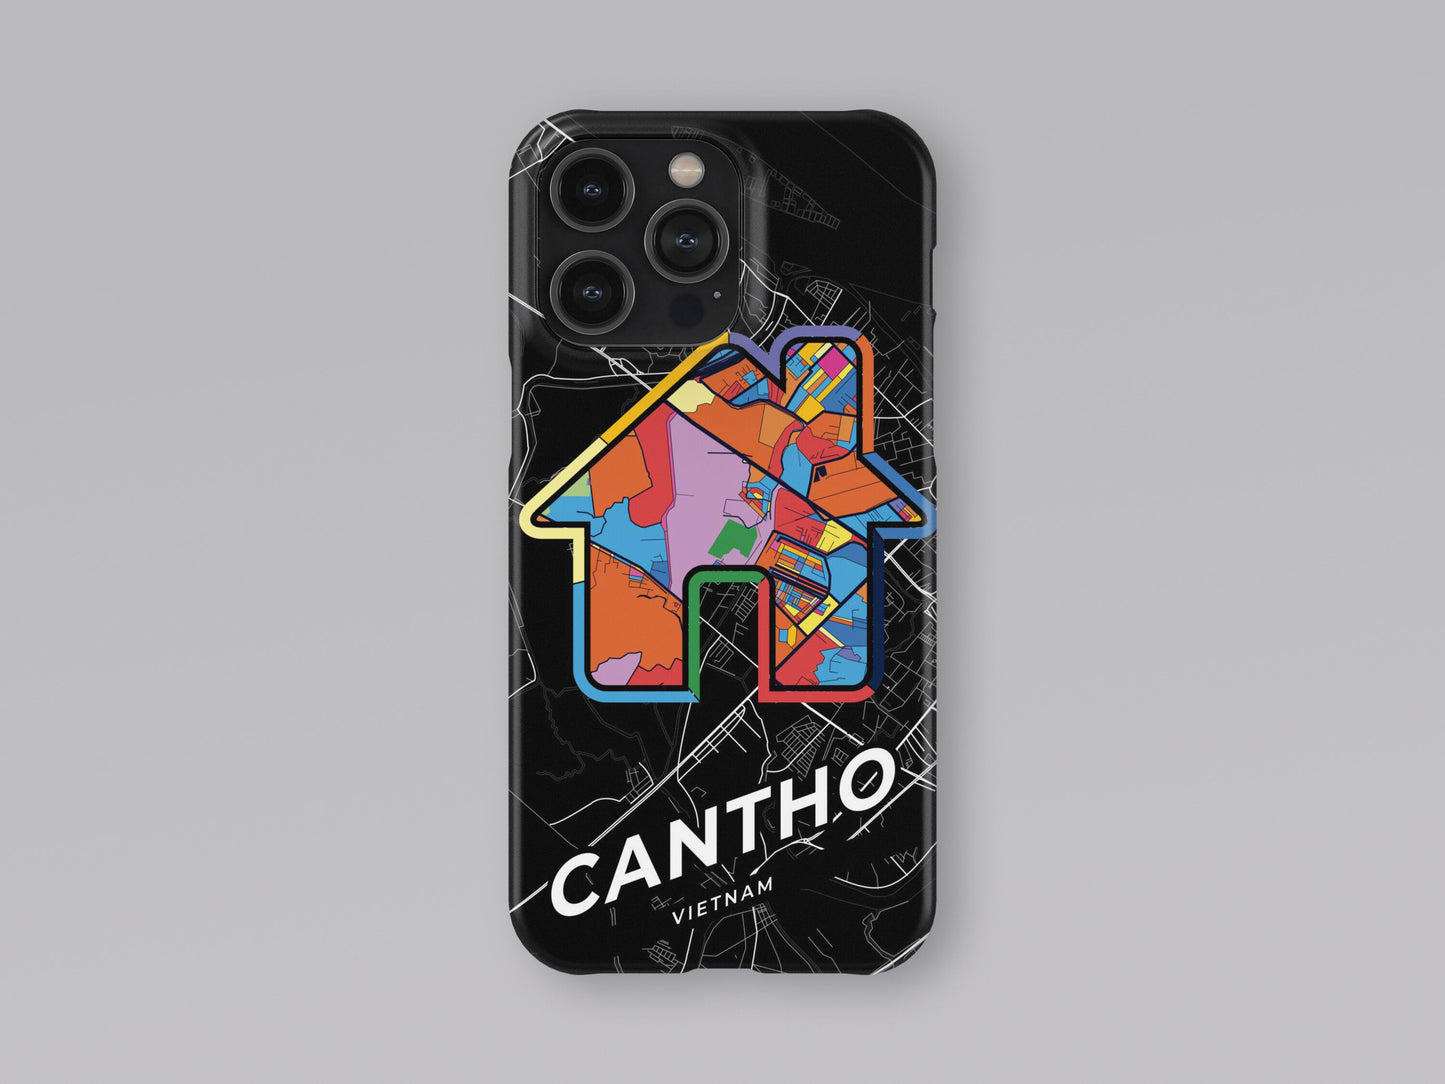 Cantho Vietnam slim phone case with colorful icon. Birthday, wedding or housewarming gift. Couple match cases. 3